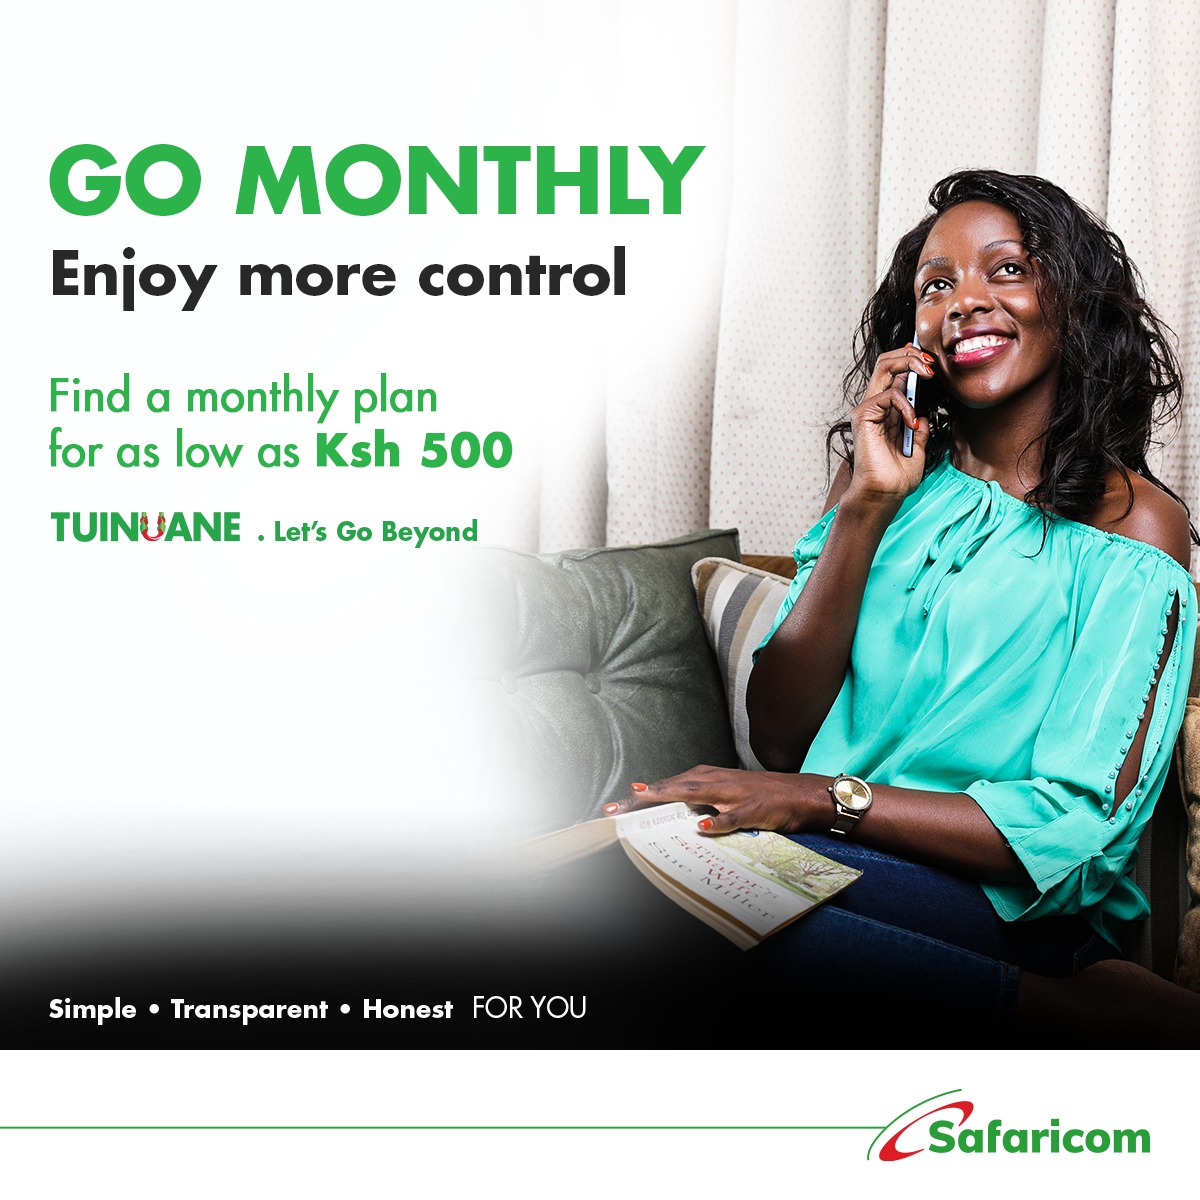 The new #SafaricomGoMonthly lets you enjoy more control on spend & value for money. It's now cheaper than before with plans from as low as sh500. Dial *544# or go to MySafaricom App & enjoy worry free monthly connections.
#GoMonthly @SafaricomPLC @Shadme2 @Vett_eran @CorleoneKE